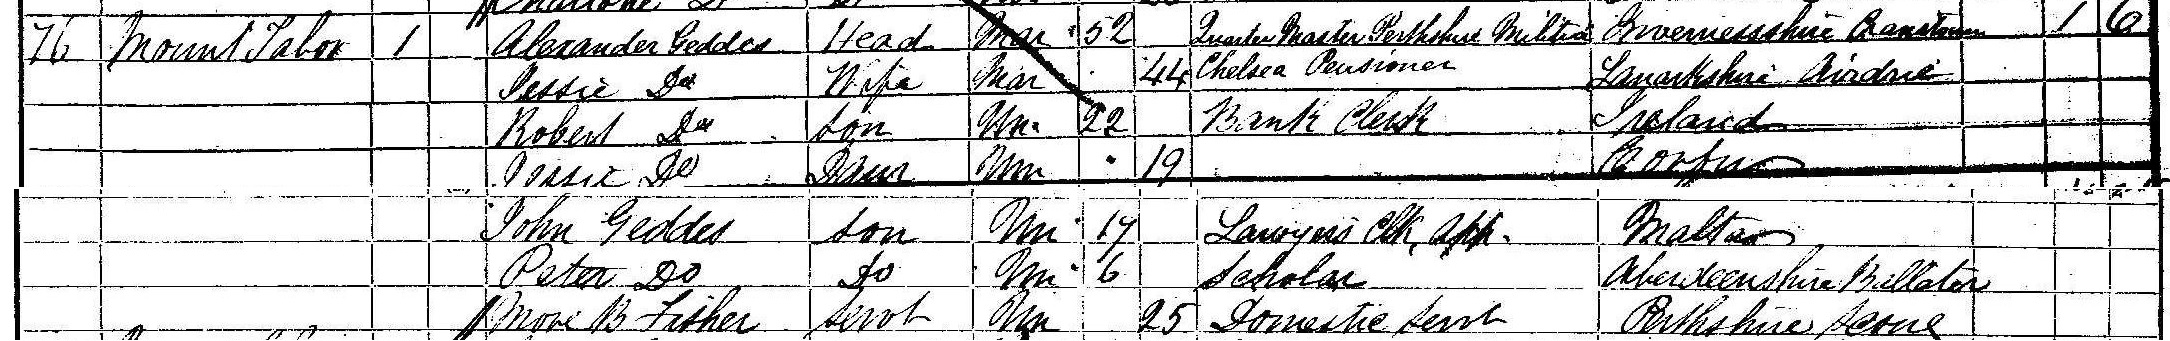 Geddes family enumerated in he 1861 census